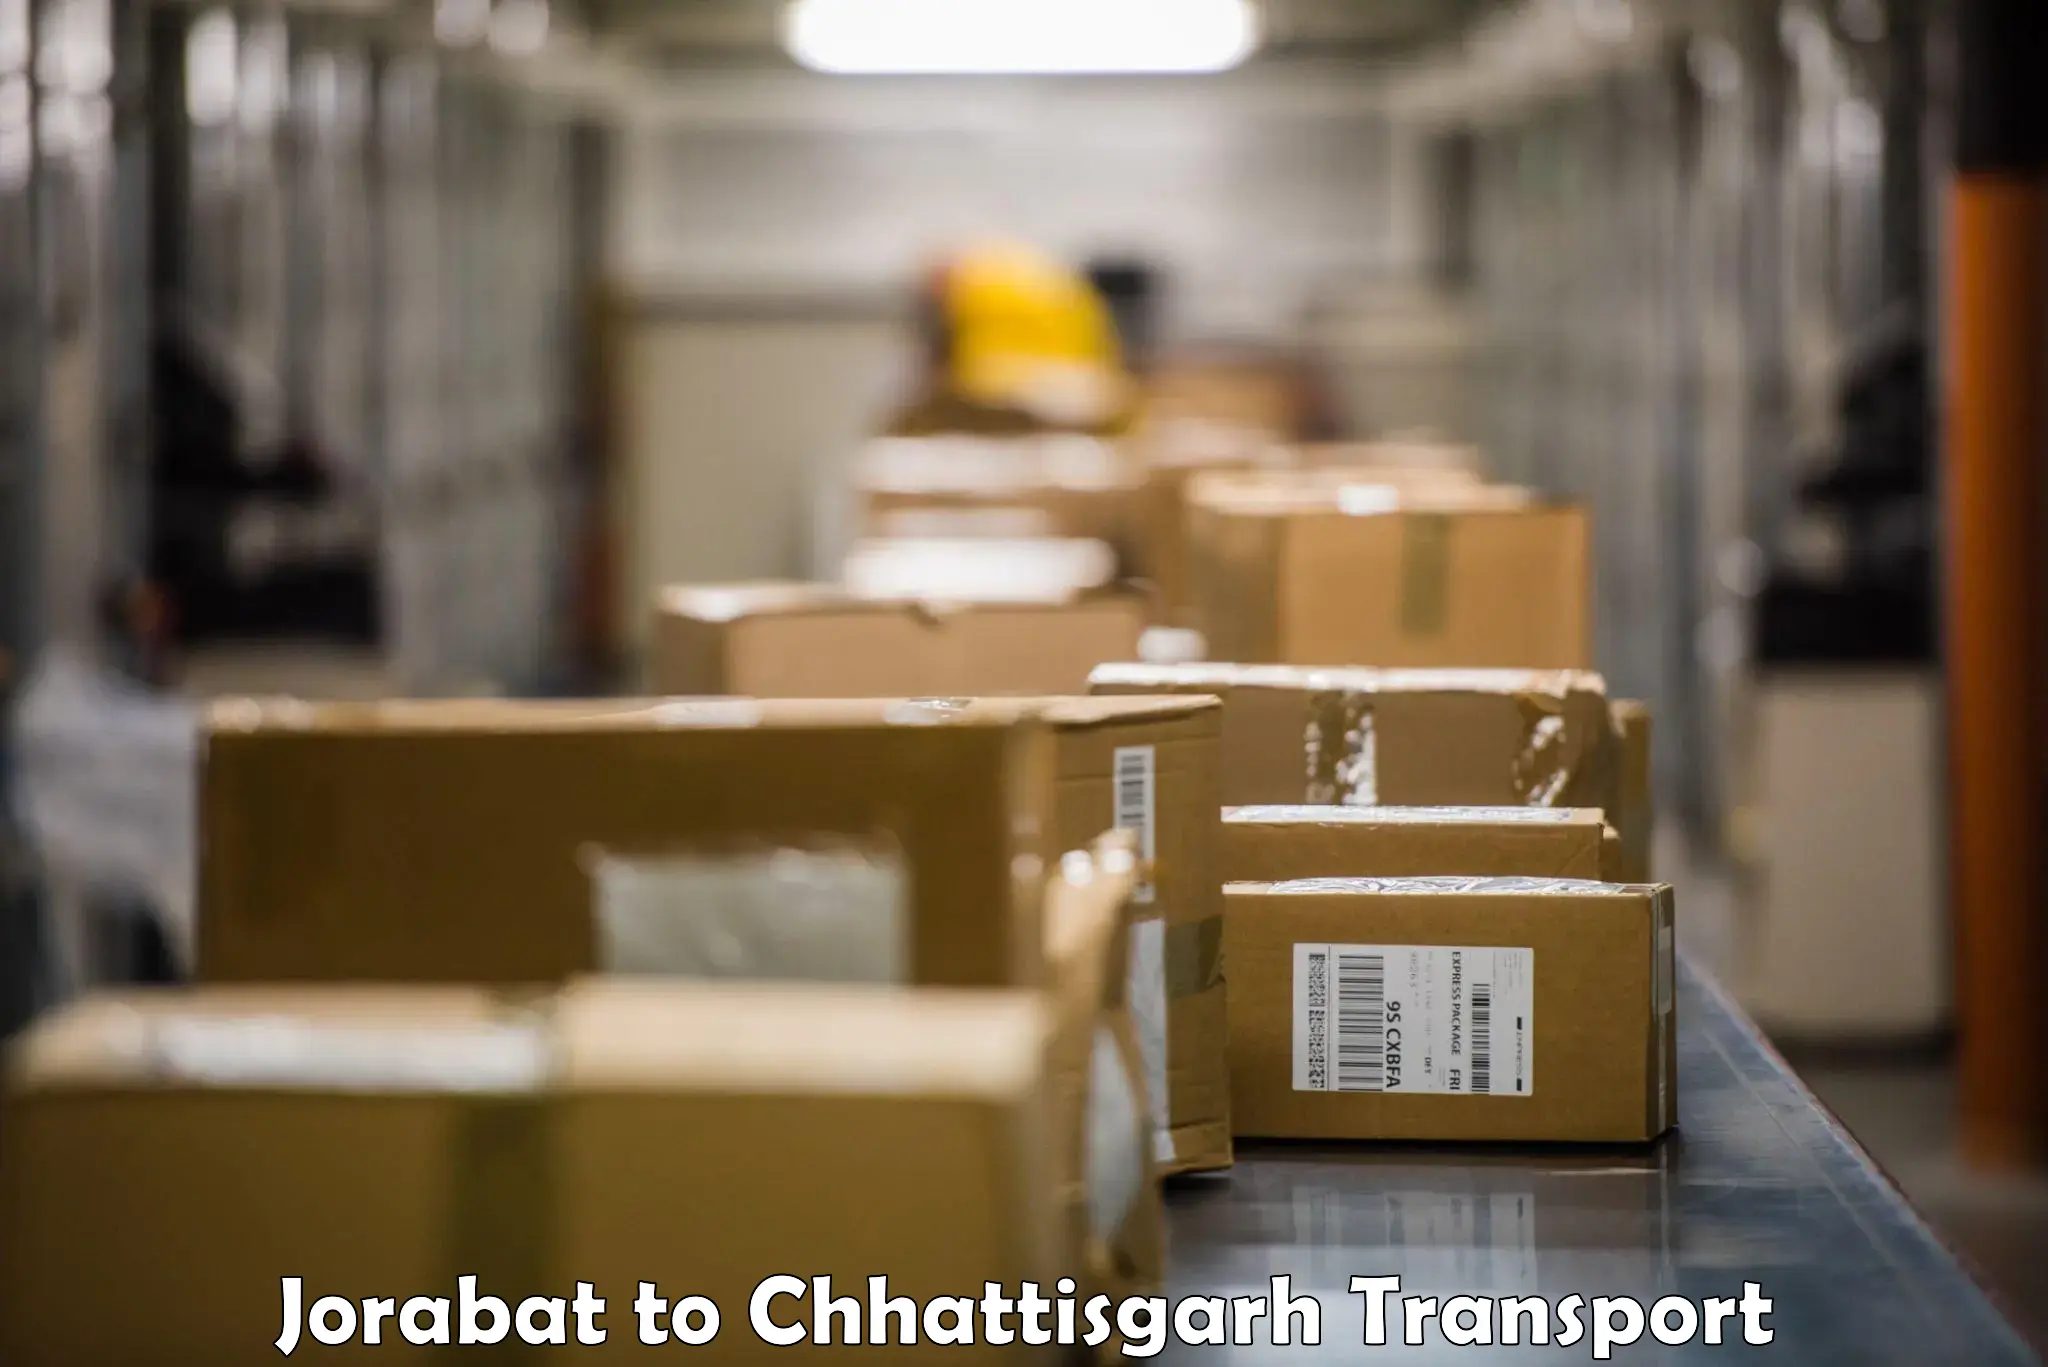 Air freight transport services in Jorabat to Basna